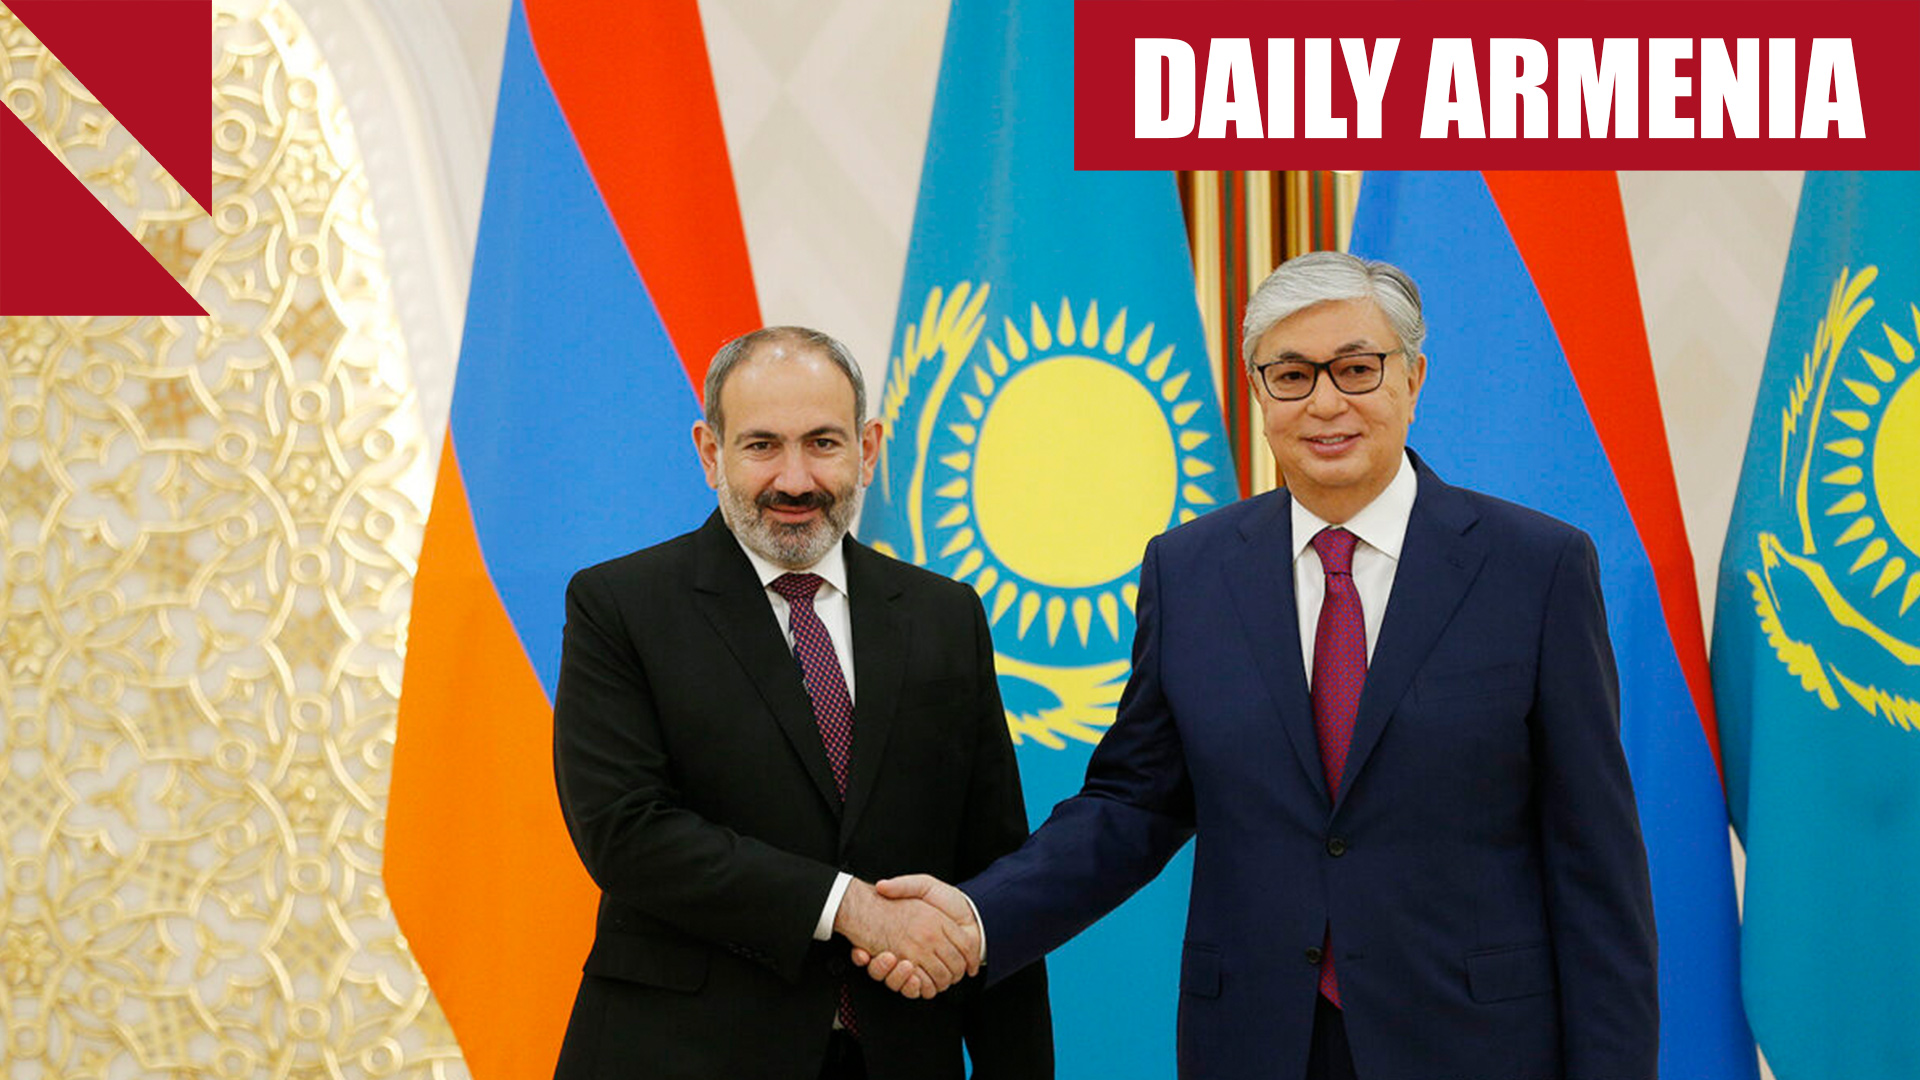 Kazakhstan’s president pledges deeper ties with Armenia on official visit